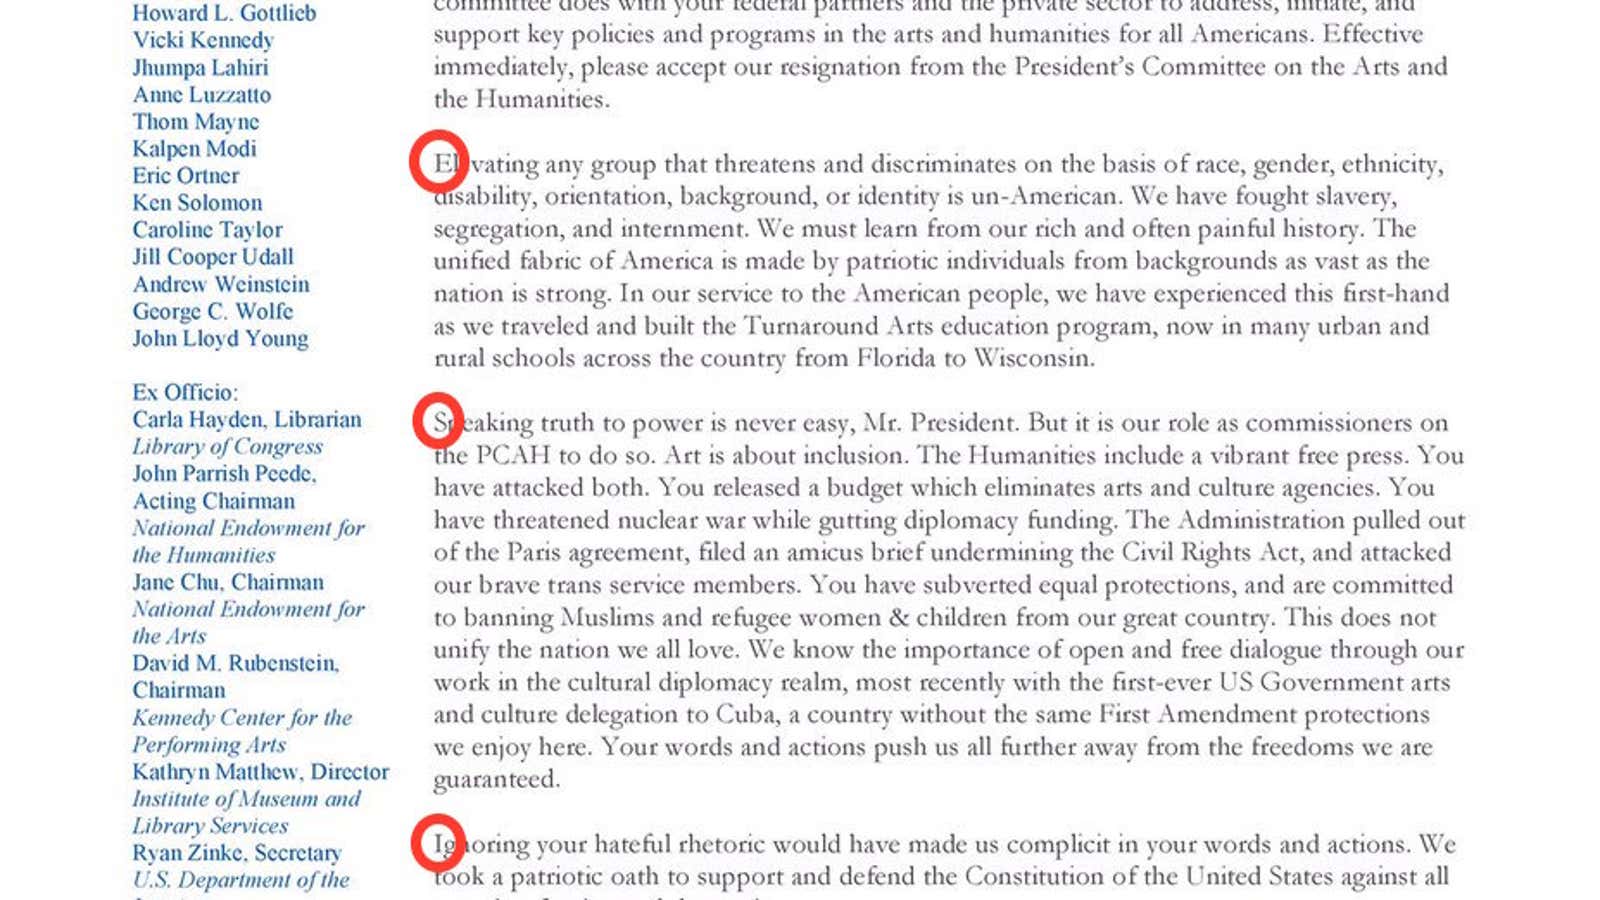 Trump’s entire arts council resigned with a scathing letter containing a clever hidden message